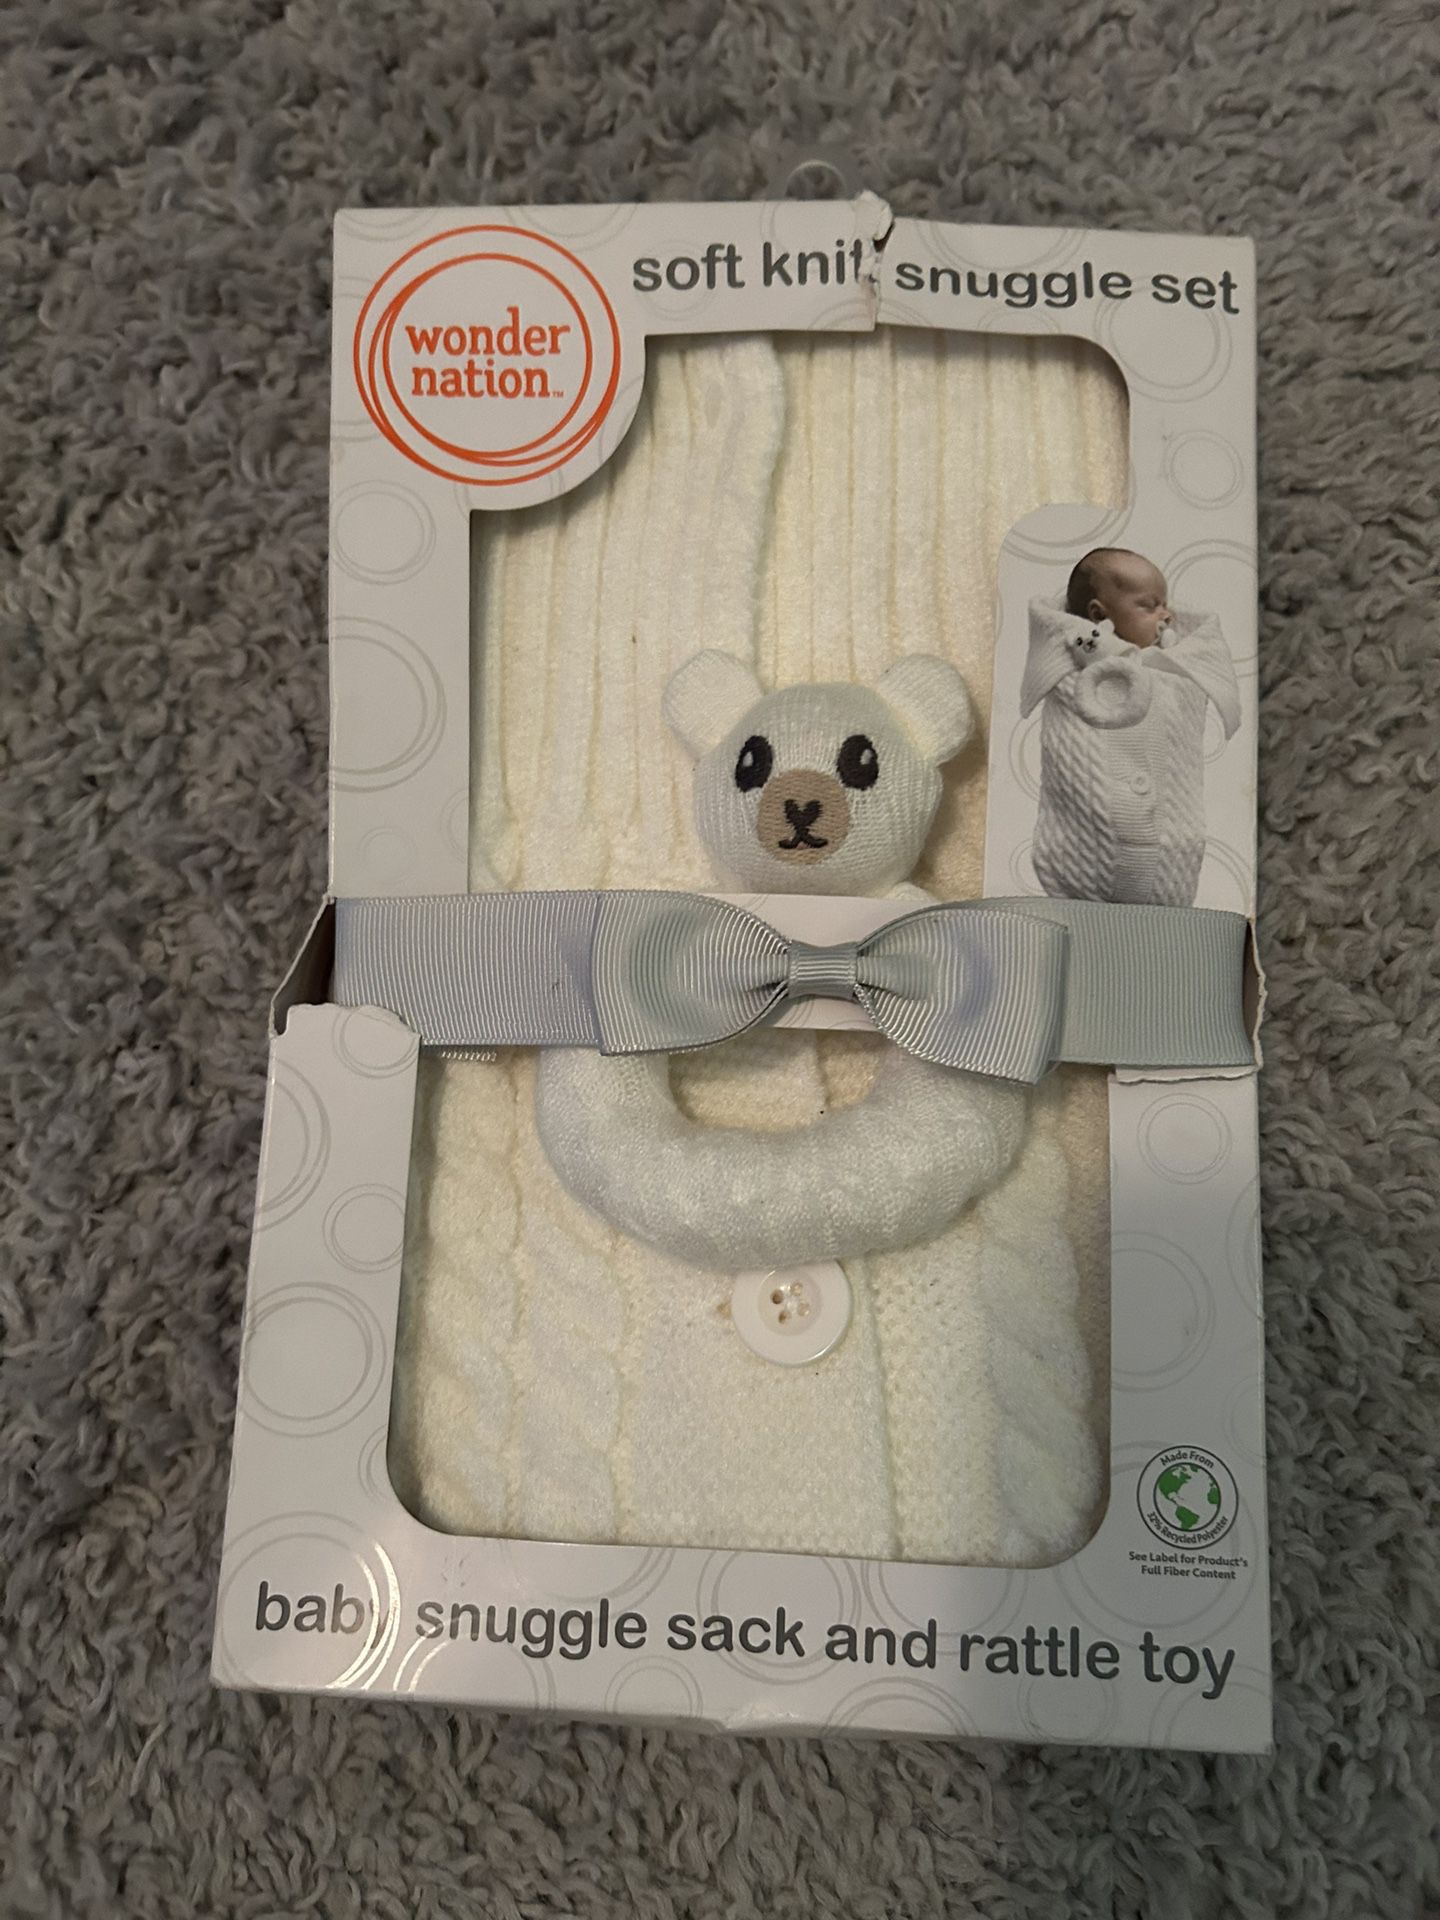 Baby Snuggle Sack Set With Rattle Toy